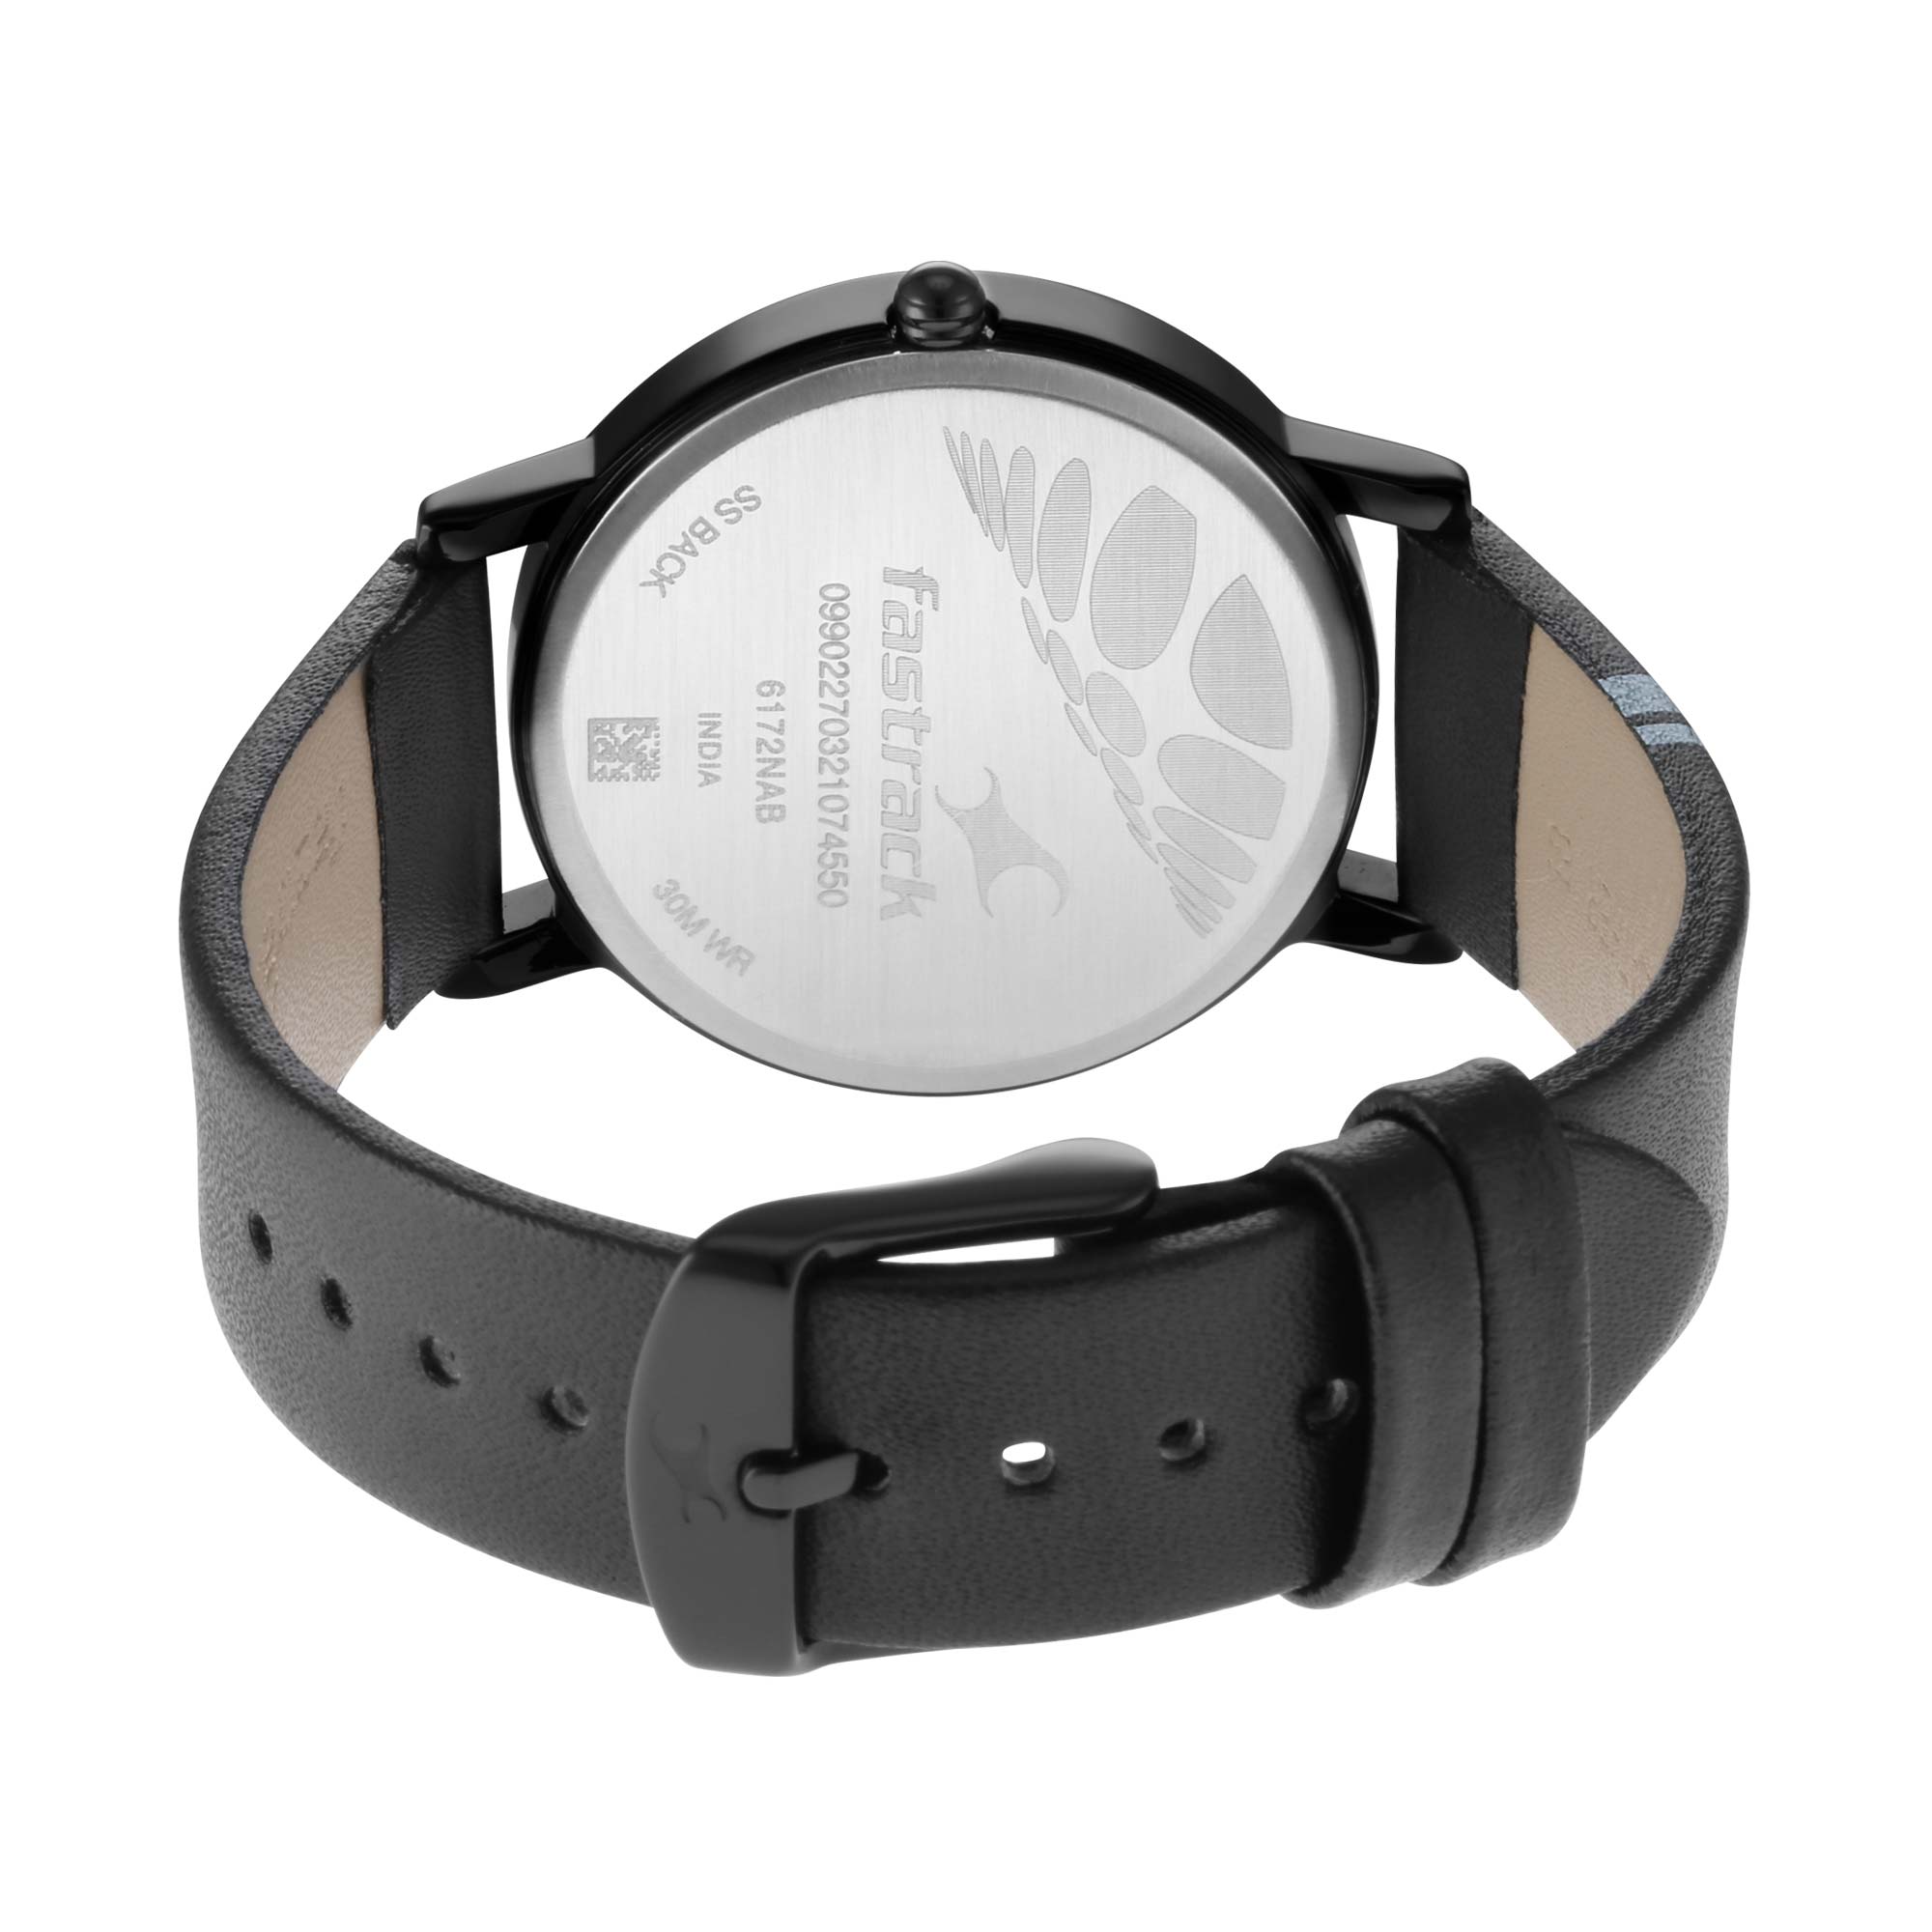 Fastrack Wear Your Look Quartz Analog with Day and Date Black Dial Leather Strap Watch for Girls